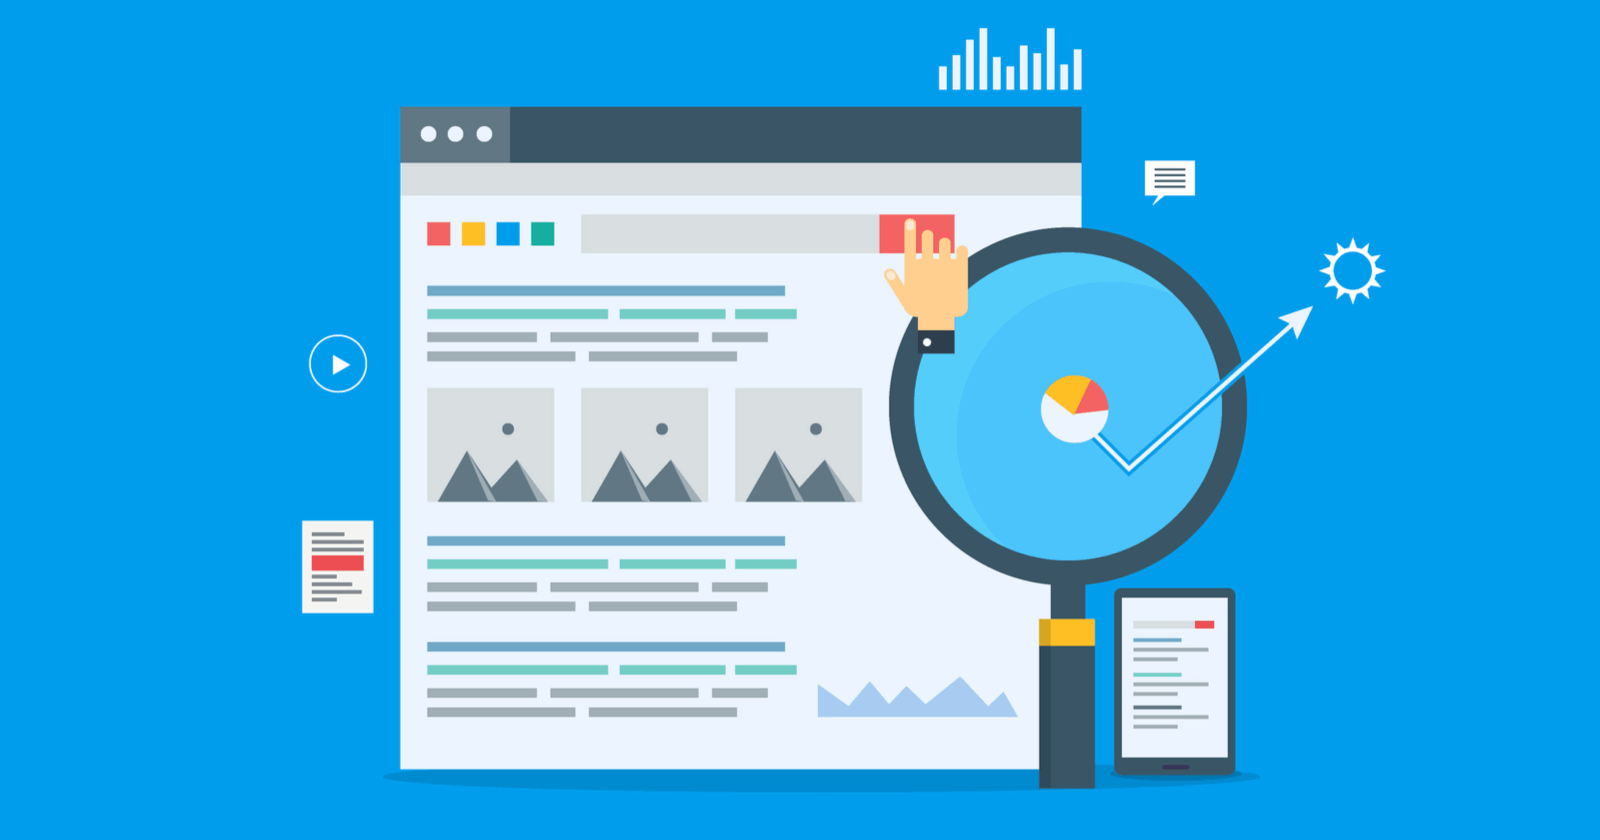 just how important is structured data in seo?